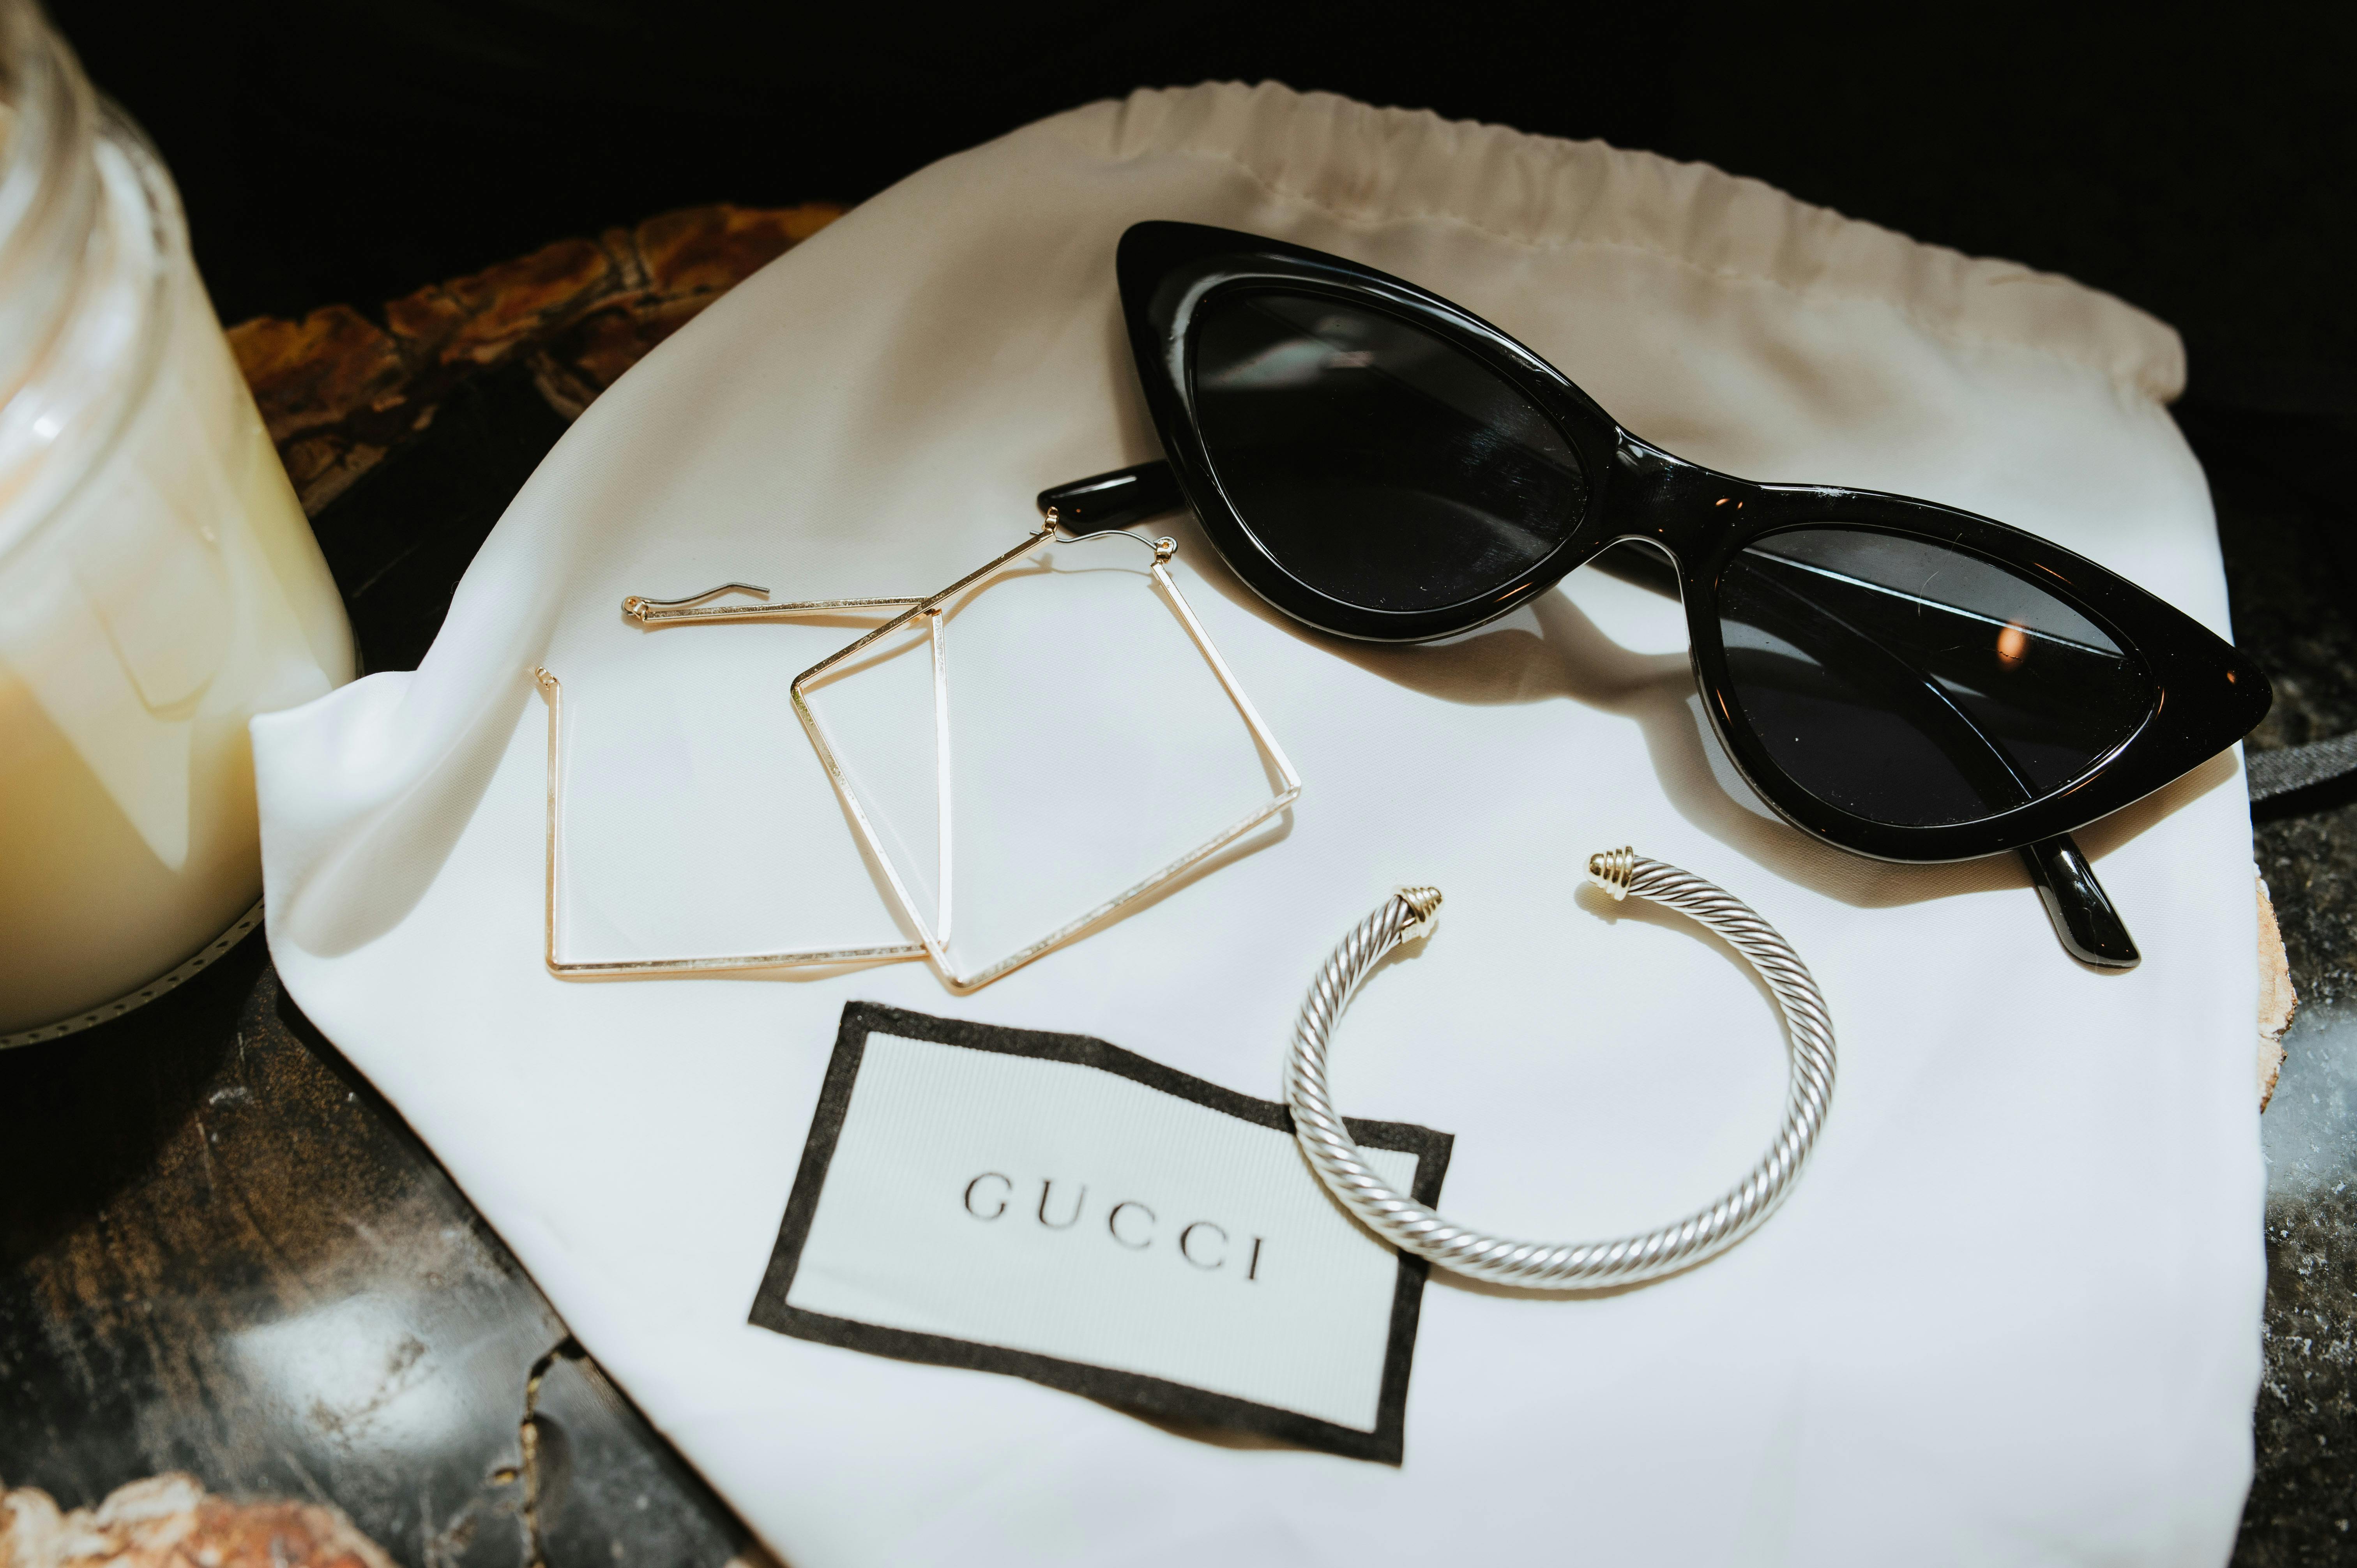 Gucci Bag Photos, Download The BEST Free Gucci Bag Stock Photos & HD Images